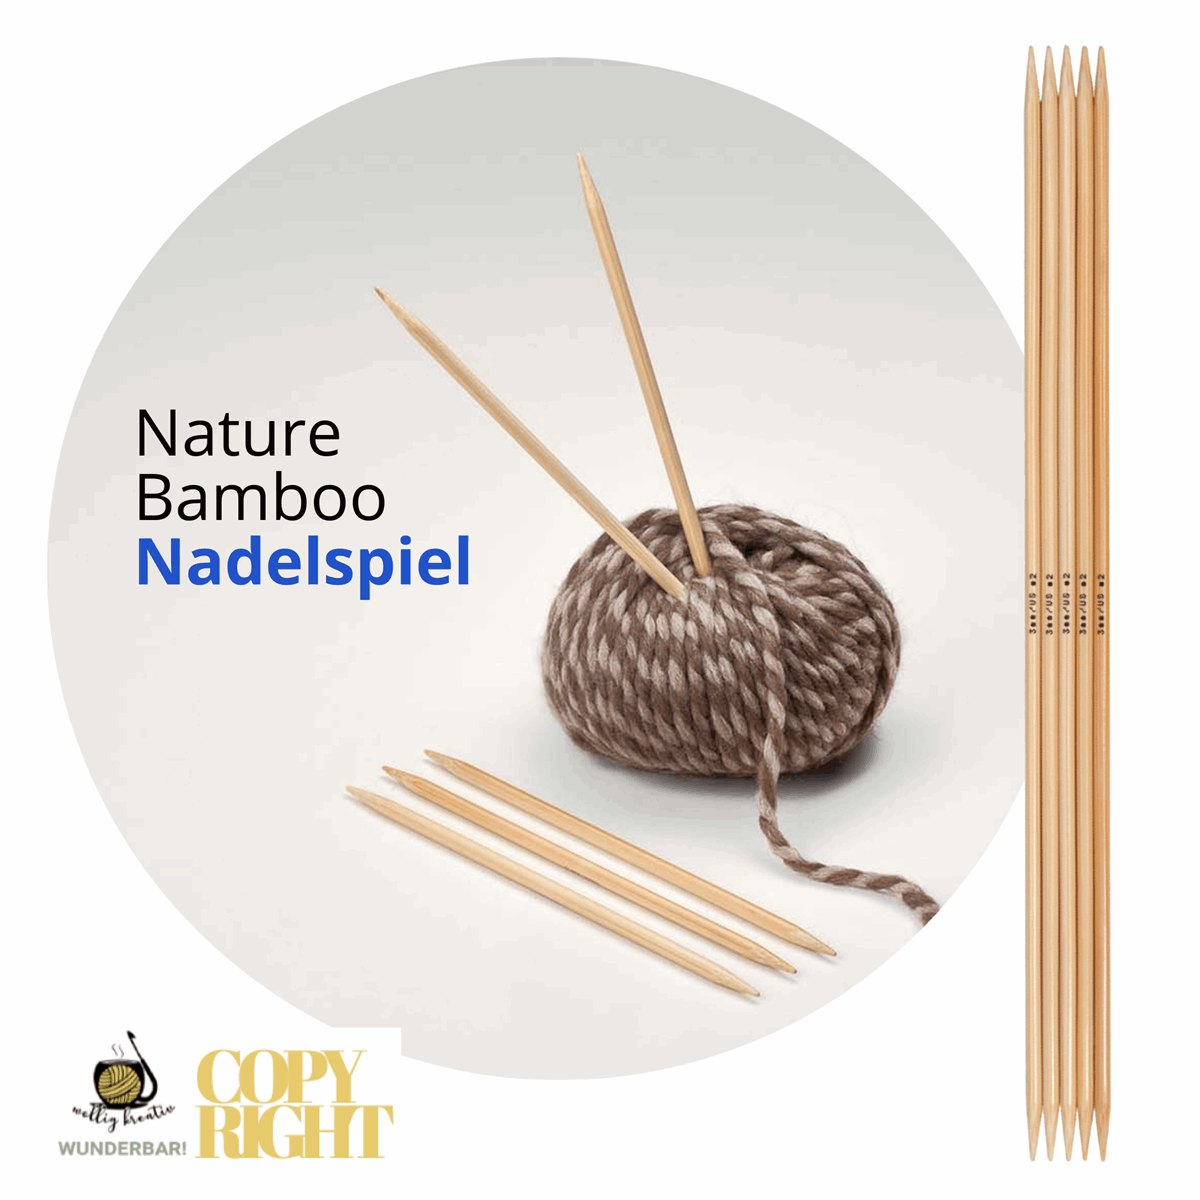 Addi, Nature Bamboo double pointed needles, 65012, size 3.75 length 15 cm